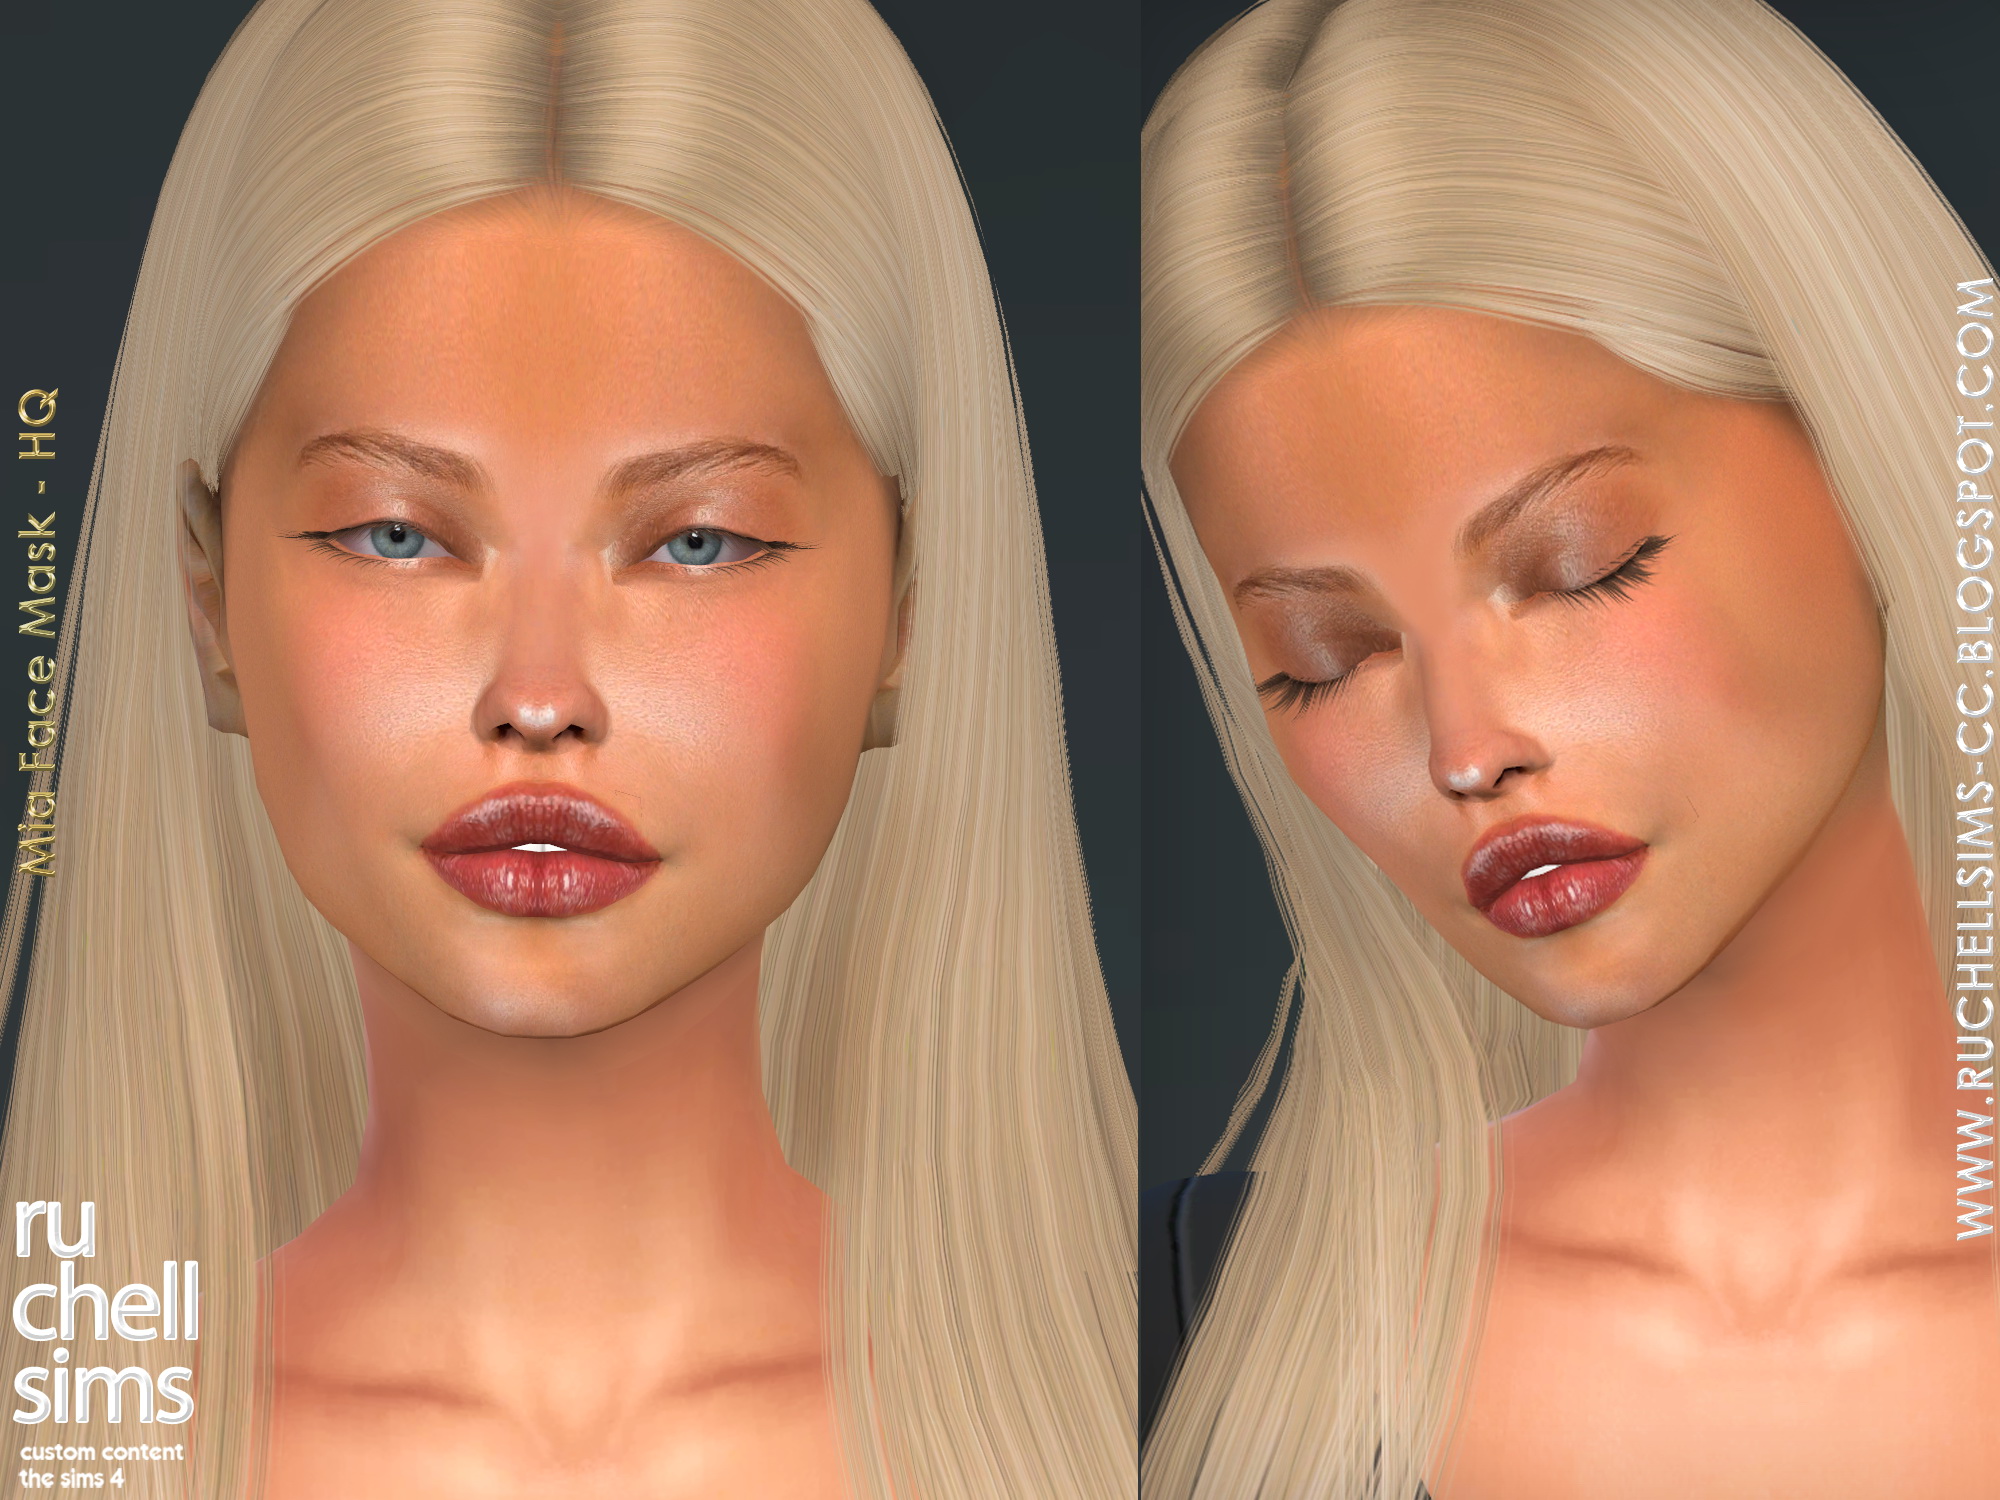 MIA FACE MASK at Ruchell Sims » Sims 4 Updates